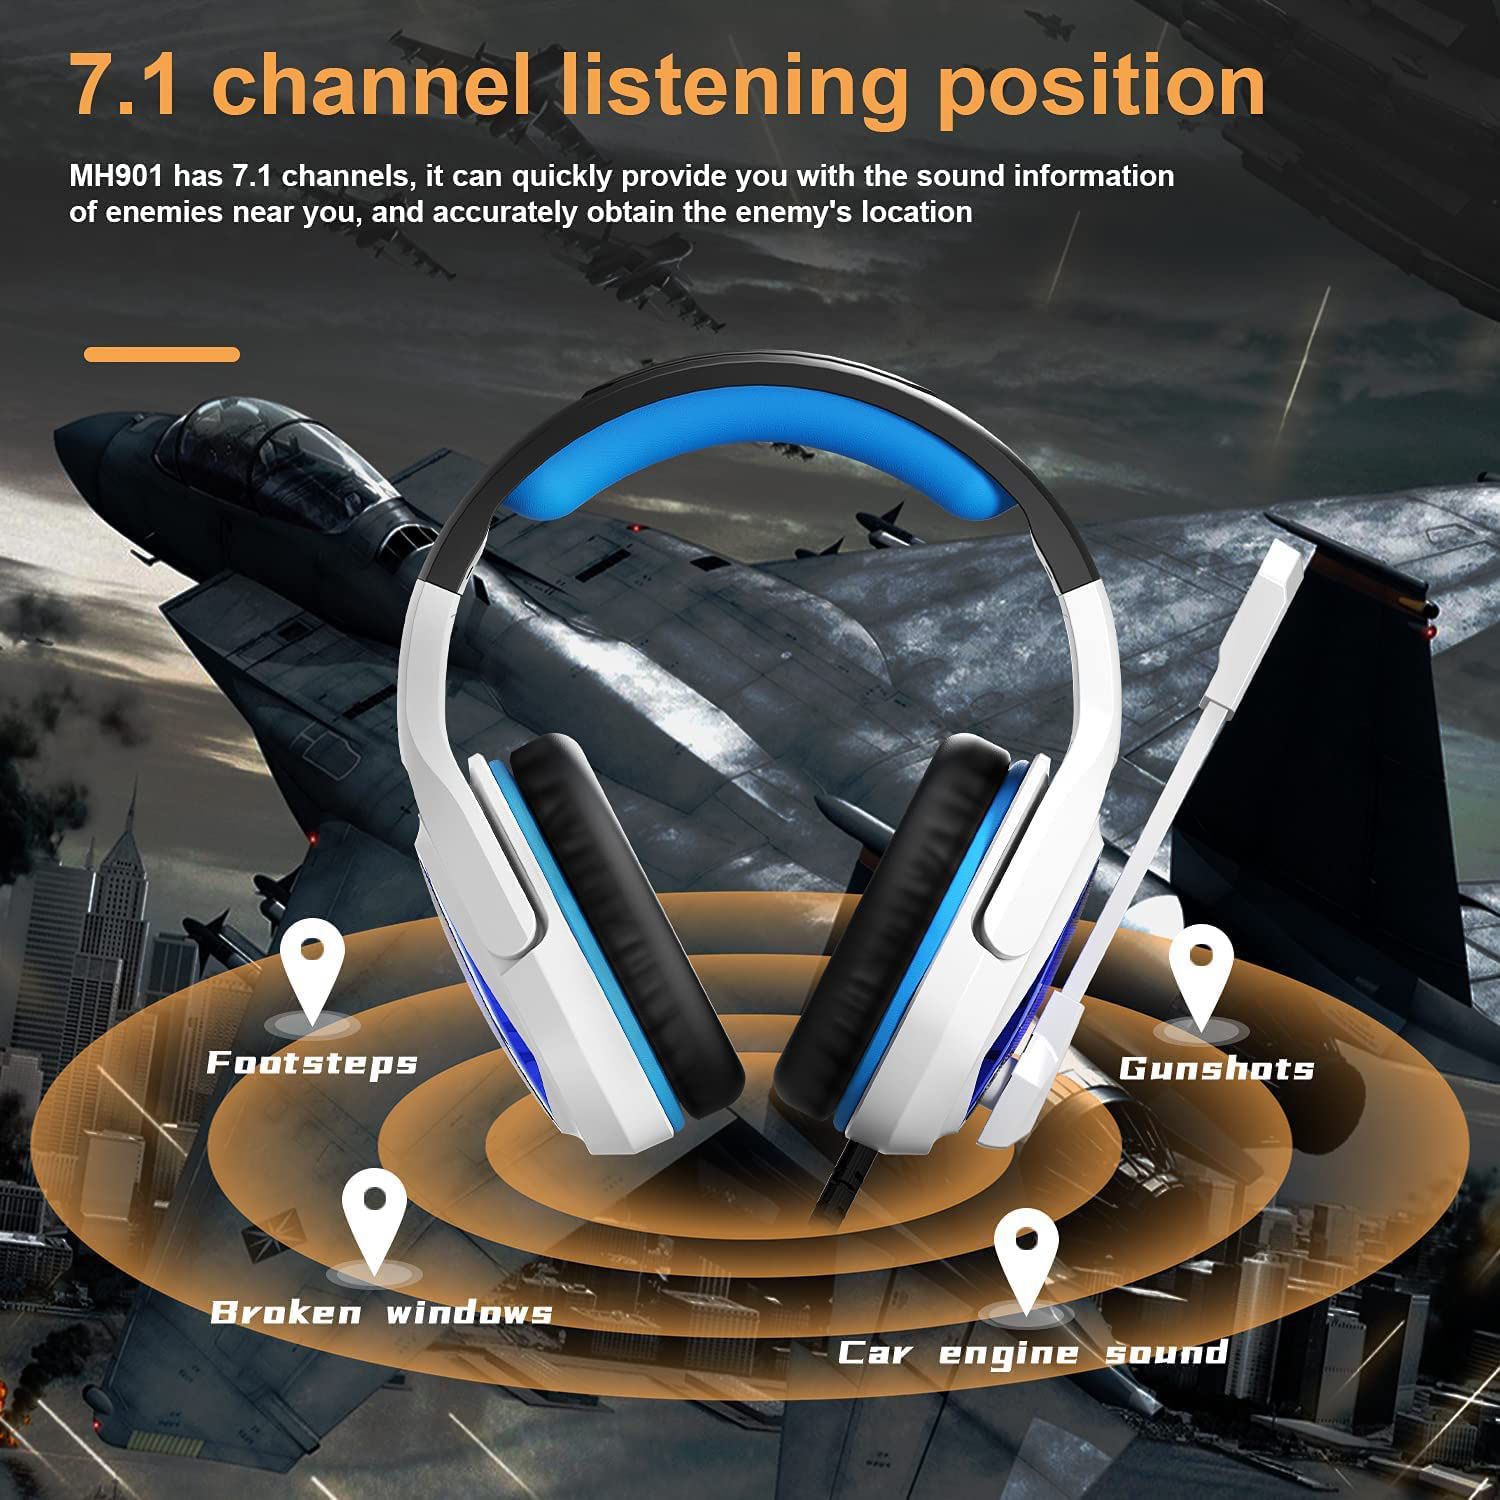 USB Gaming Headset Virtual 7.1 Surround Sound Headphones with Microphone, Soft Earmuffs Surround Sound for PC Computers, Mac, Laptop, Desktop, (Blue W